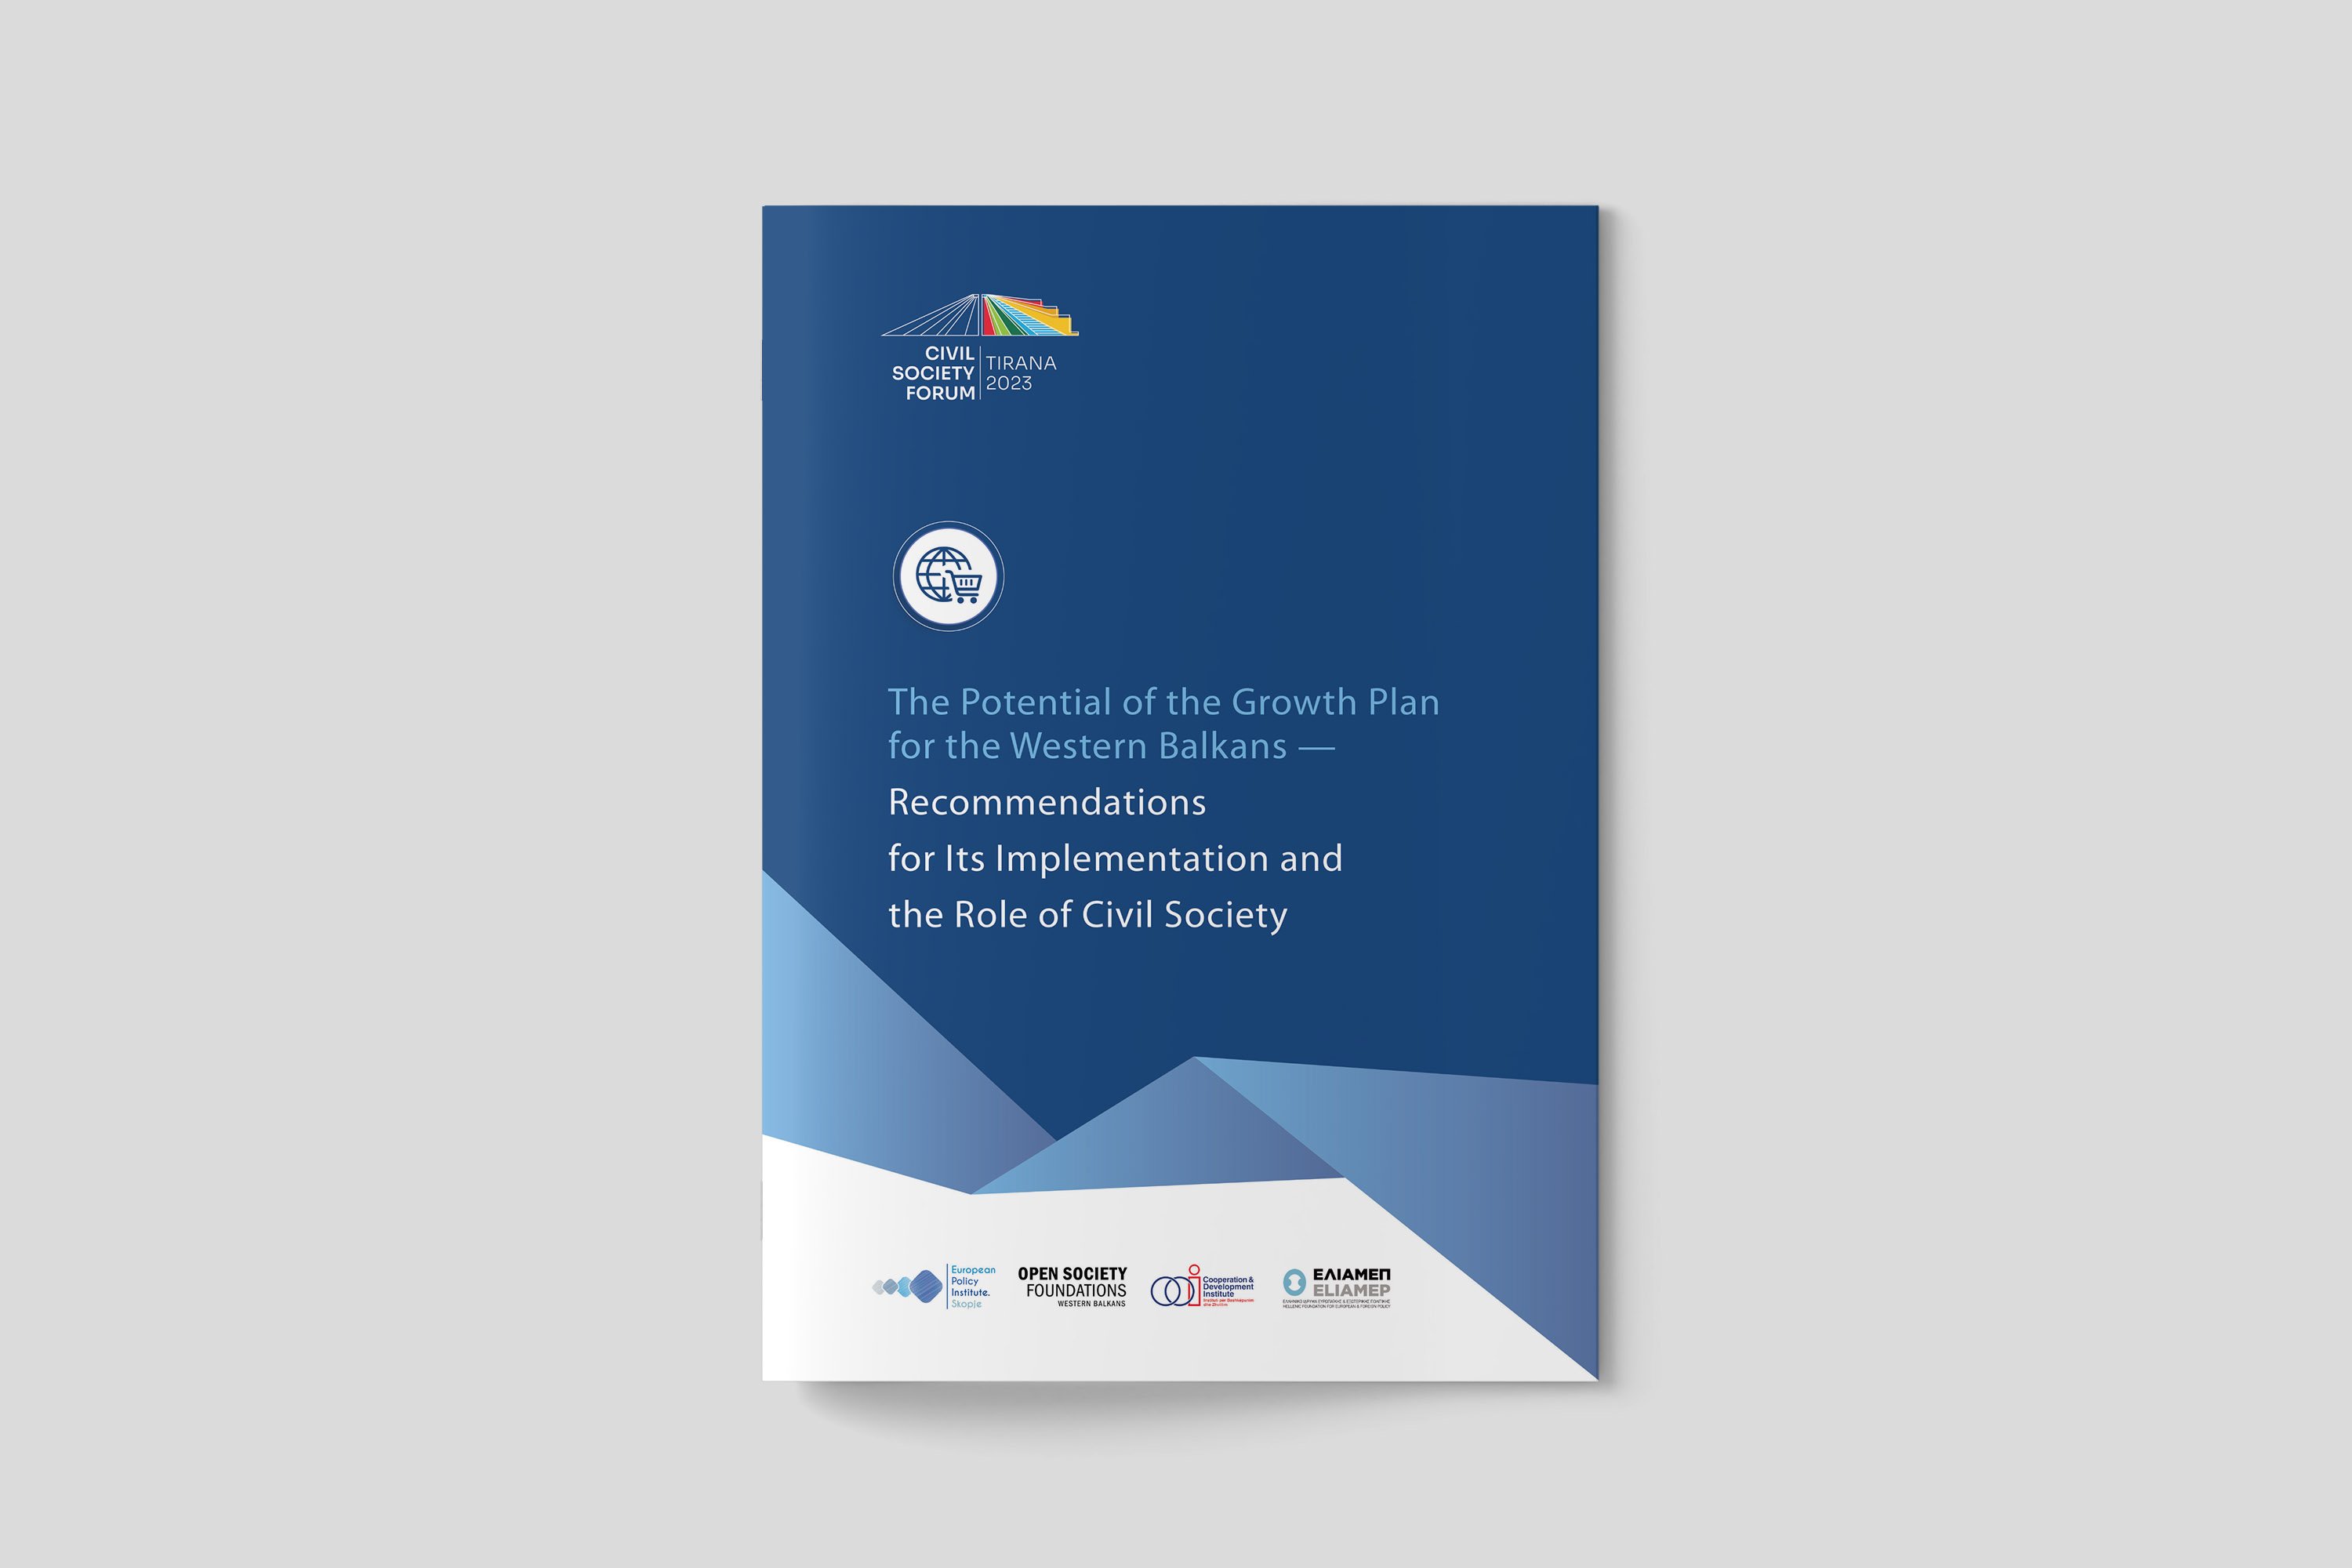 The Potential of the Growth Plan for the Western Balkans – Recommendations for its Implementation and the role of Civil Society